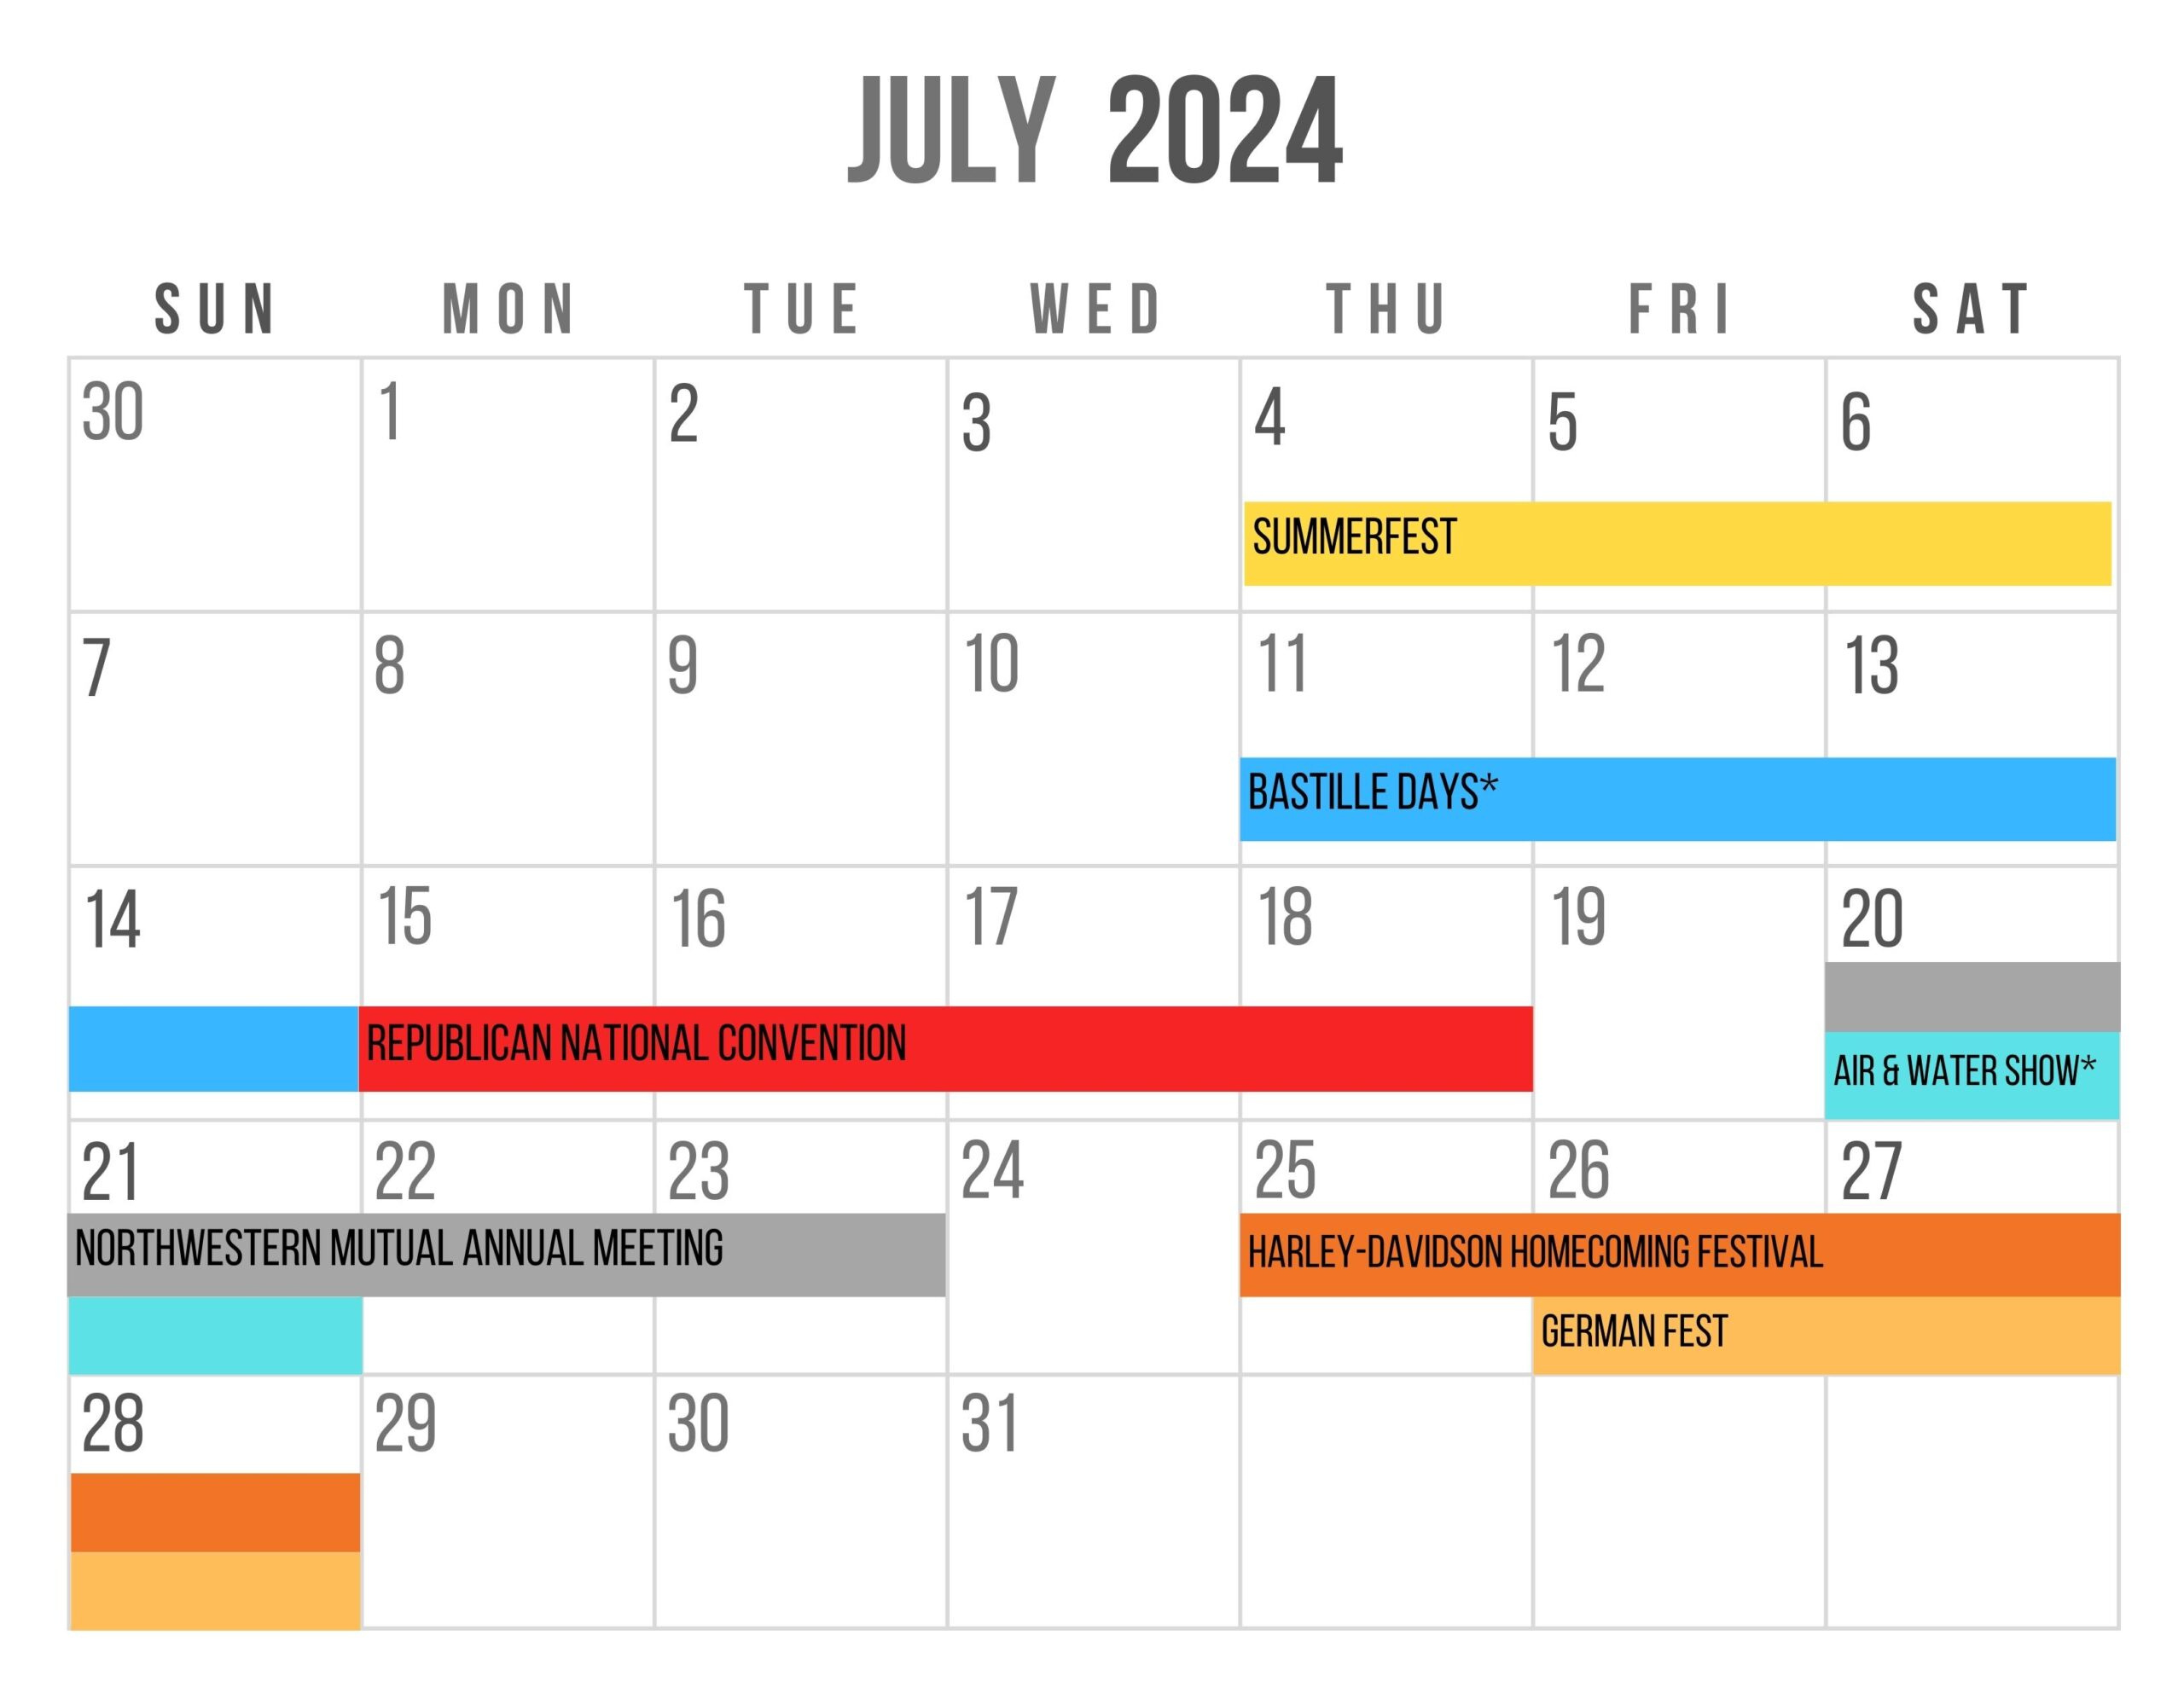 Crazy Busy Summer Planned For Milwaukee In 2024 with Milwaukee Calendar of Events July 2024